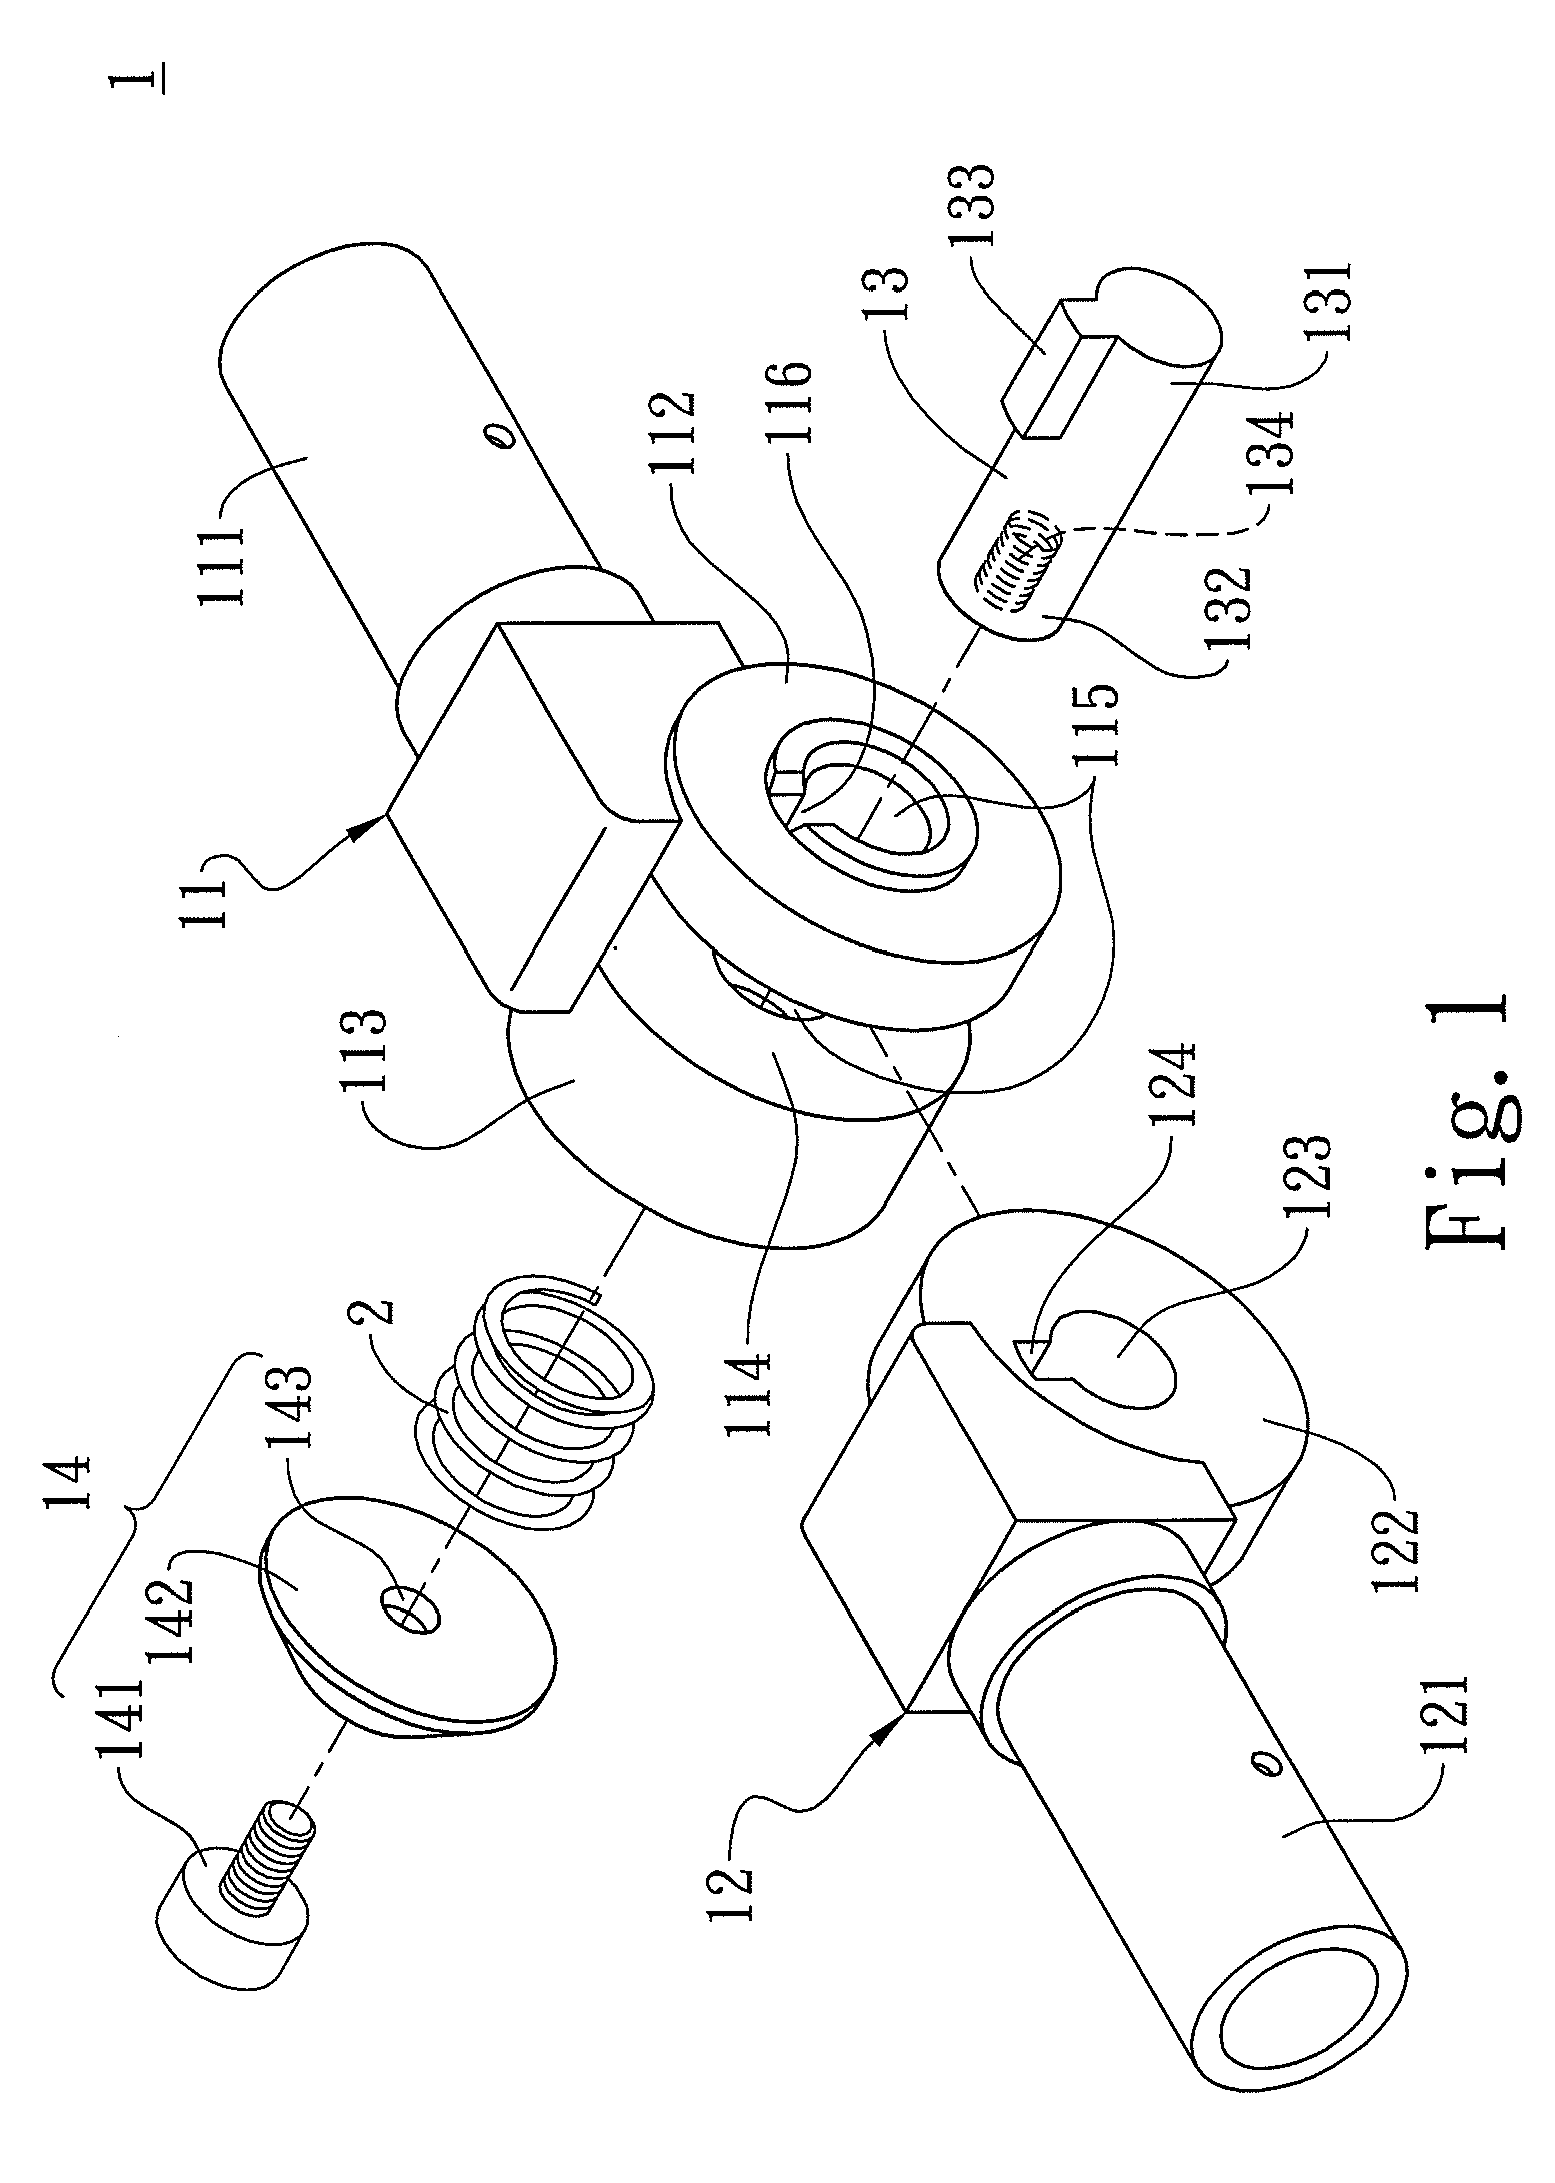 Pivot knuckle joint and tent using the same